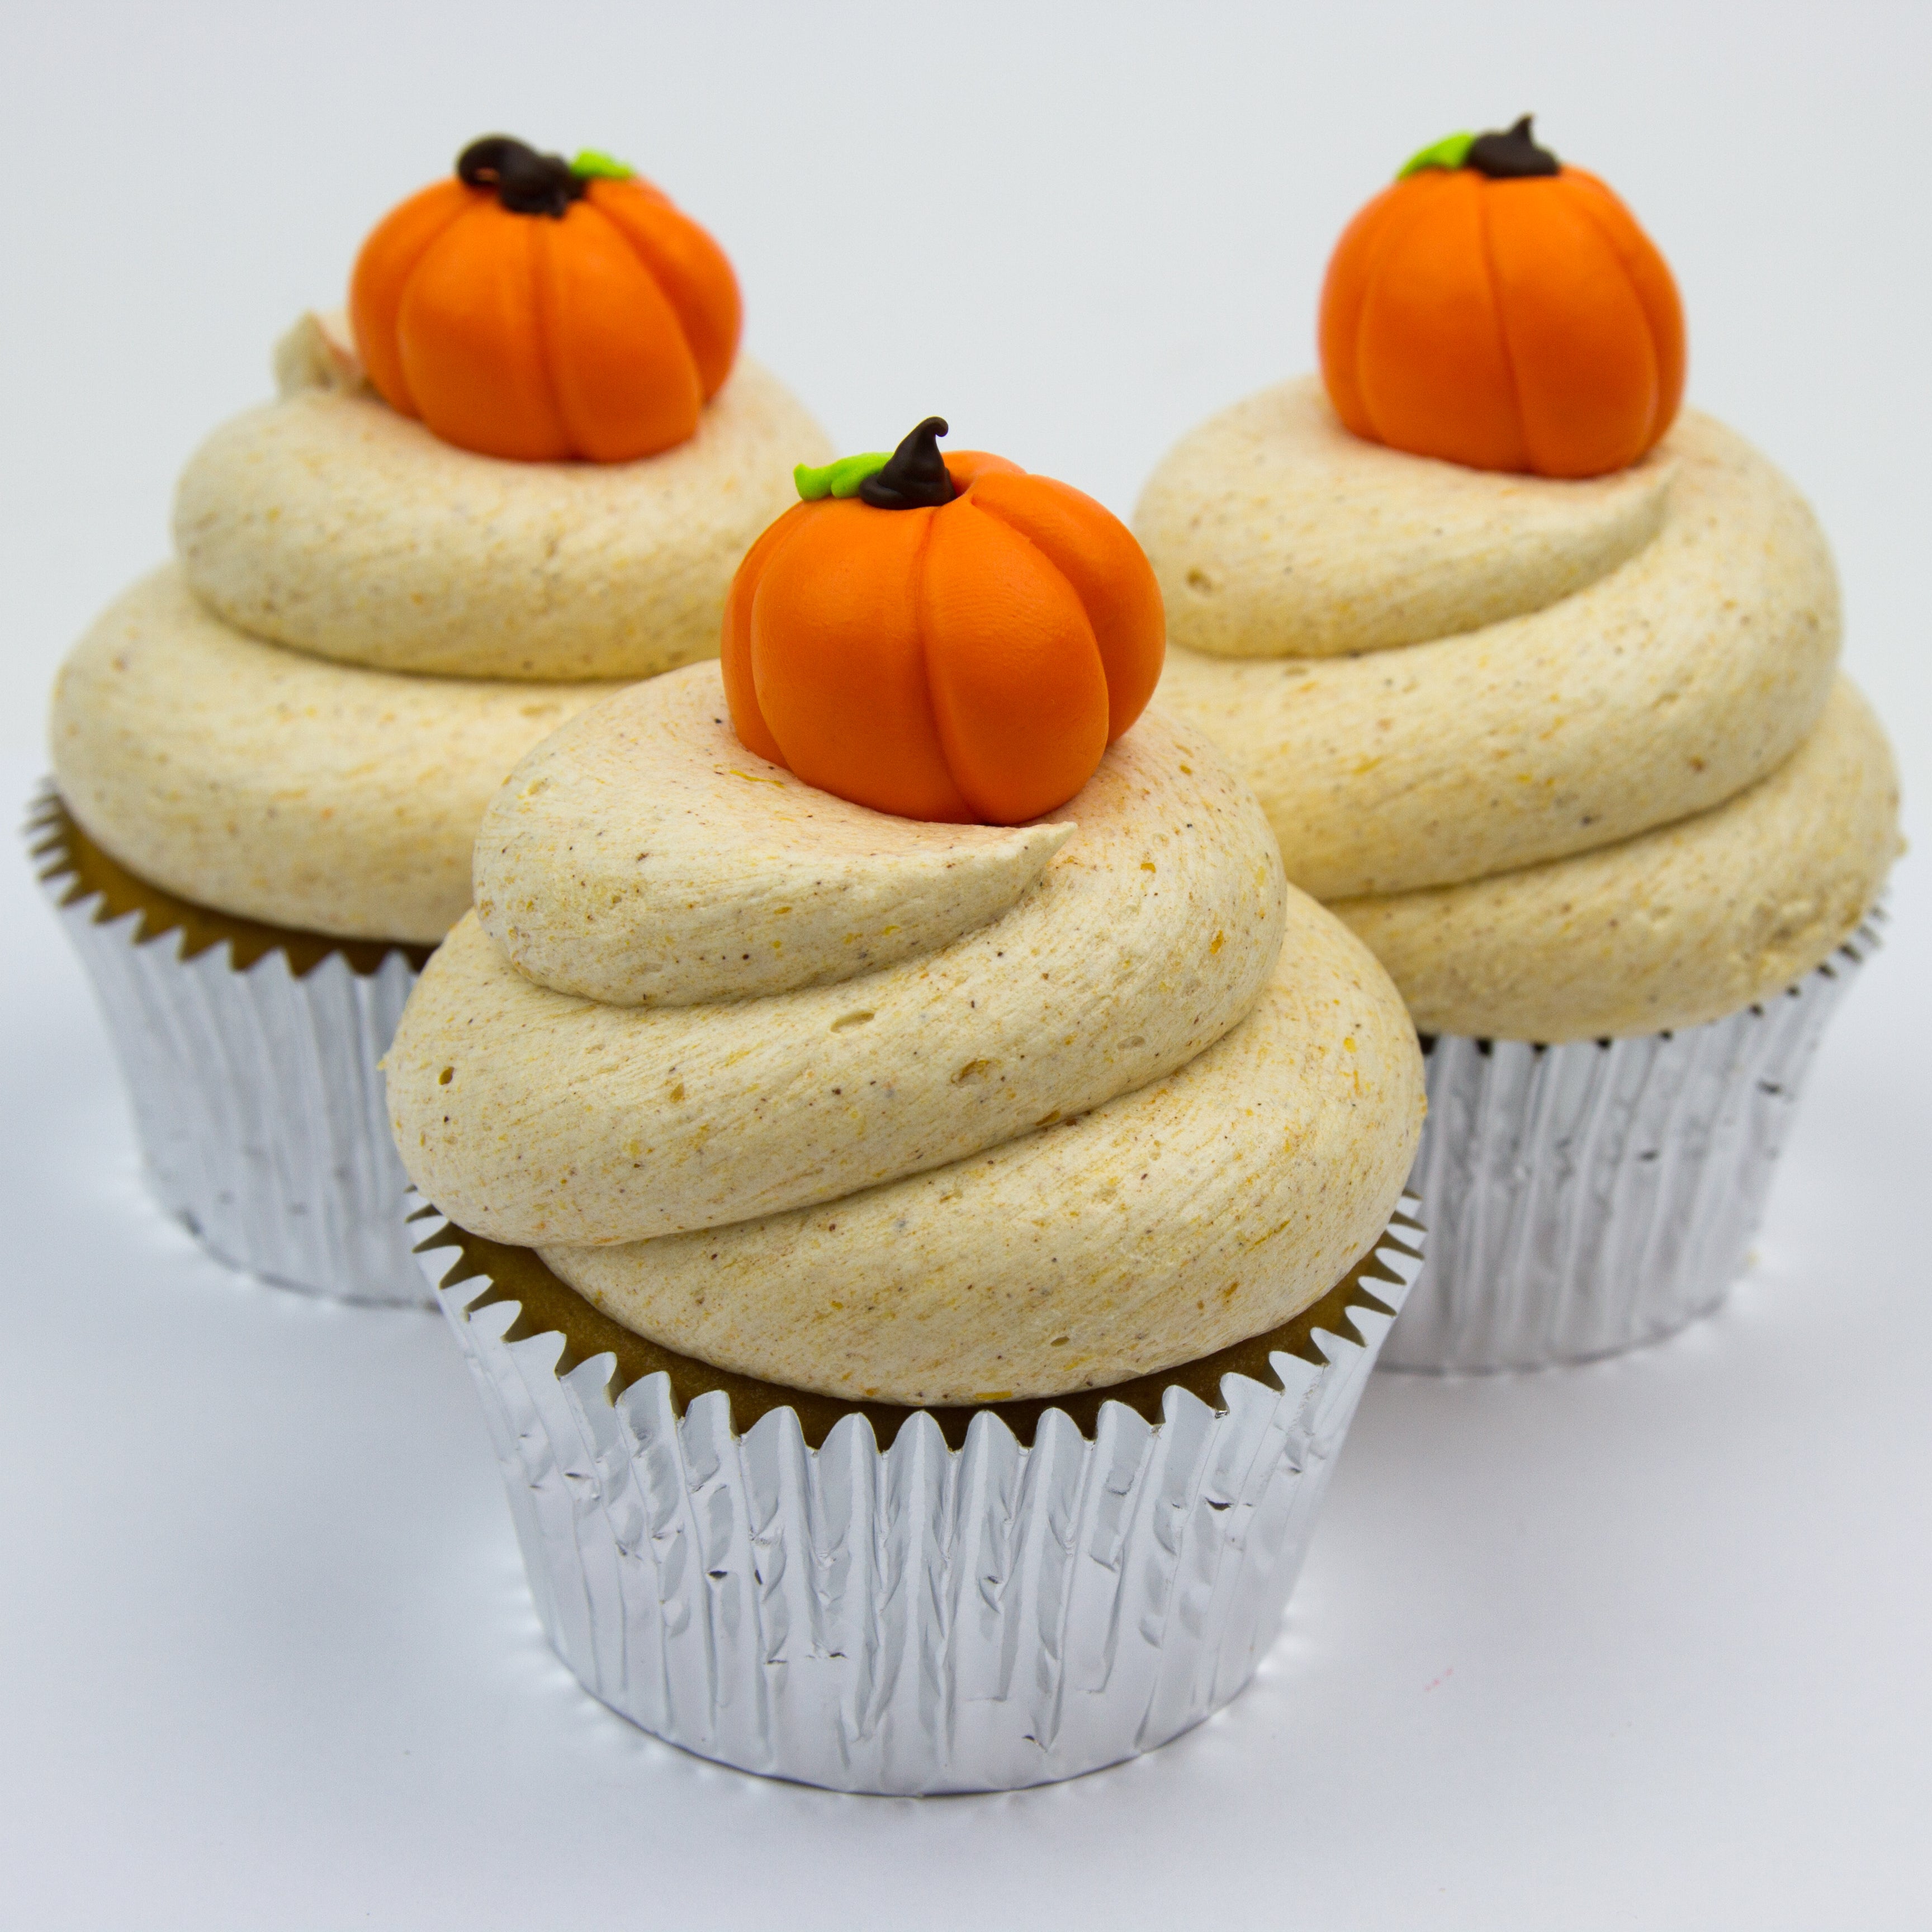 Pumpkin flavored cupcake iced with pumpkin flavored buttercream and topped with a handmade fondant pumpkin design can vary